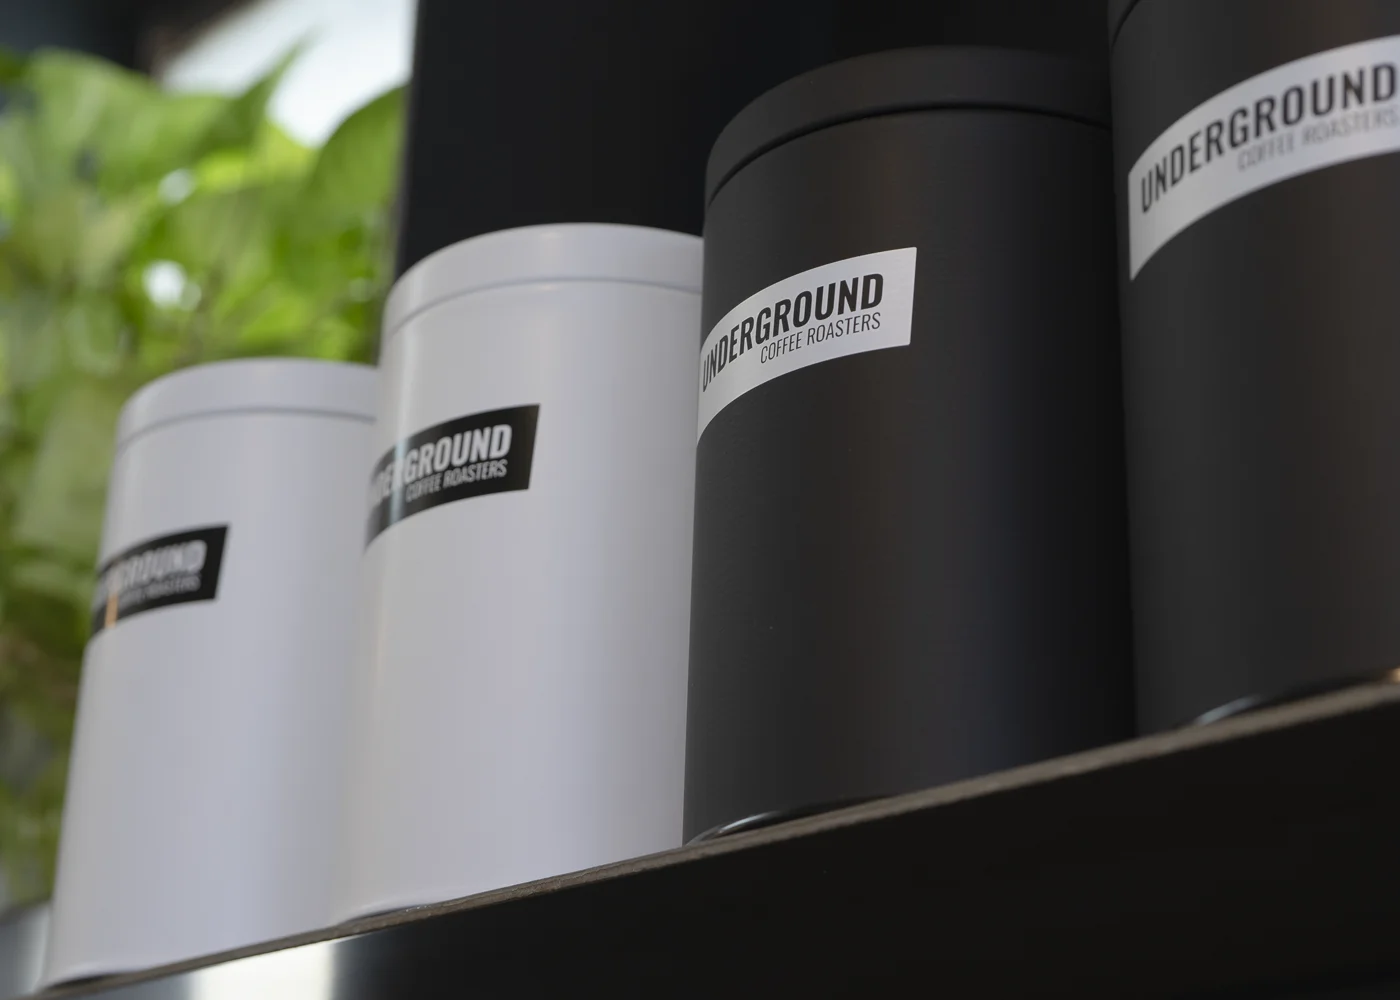 Air Tight Coffee Canisters, Made in Japan, Underground Coffee Roasters Branded